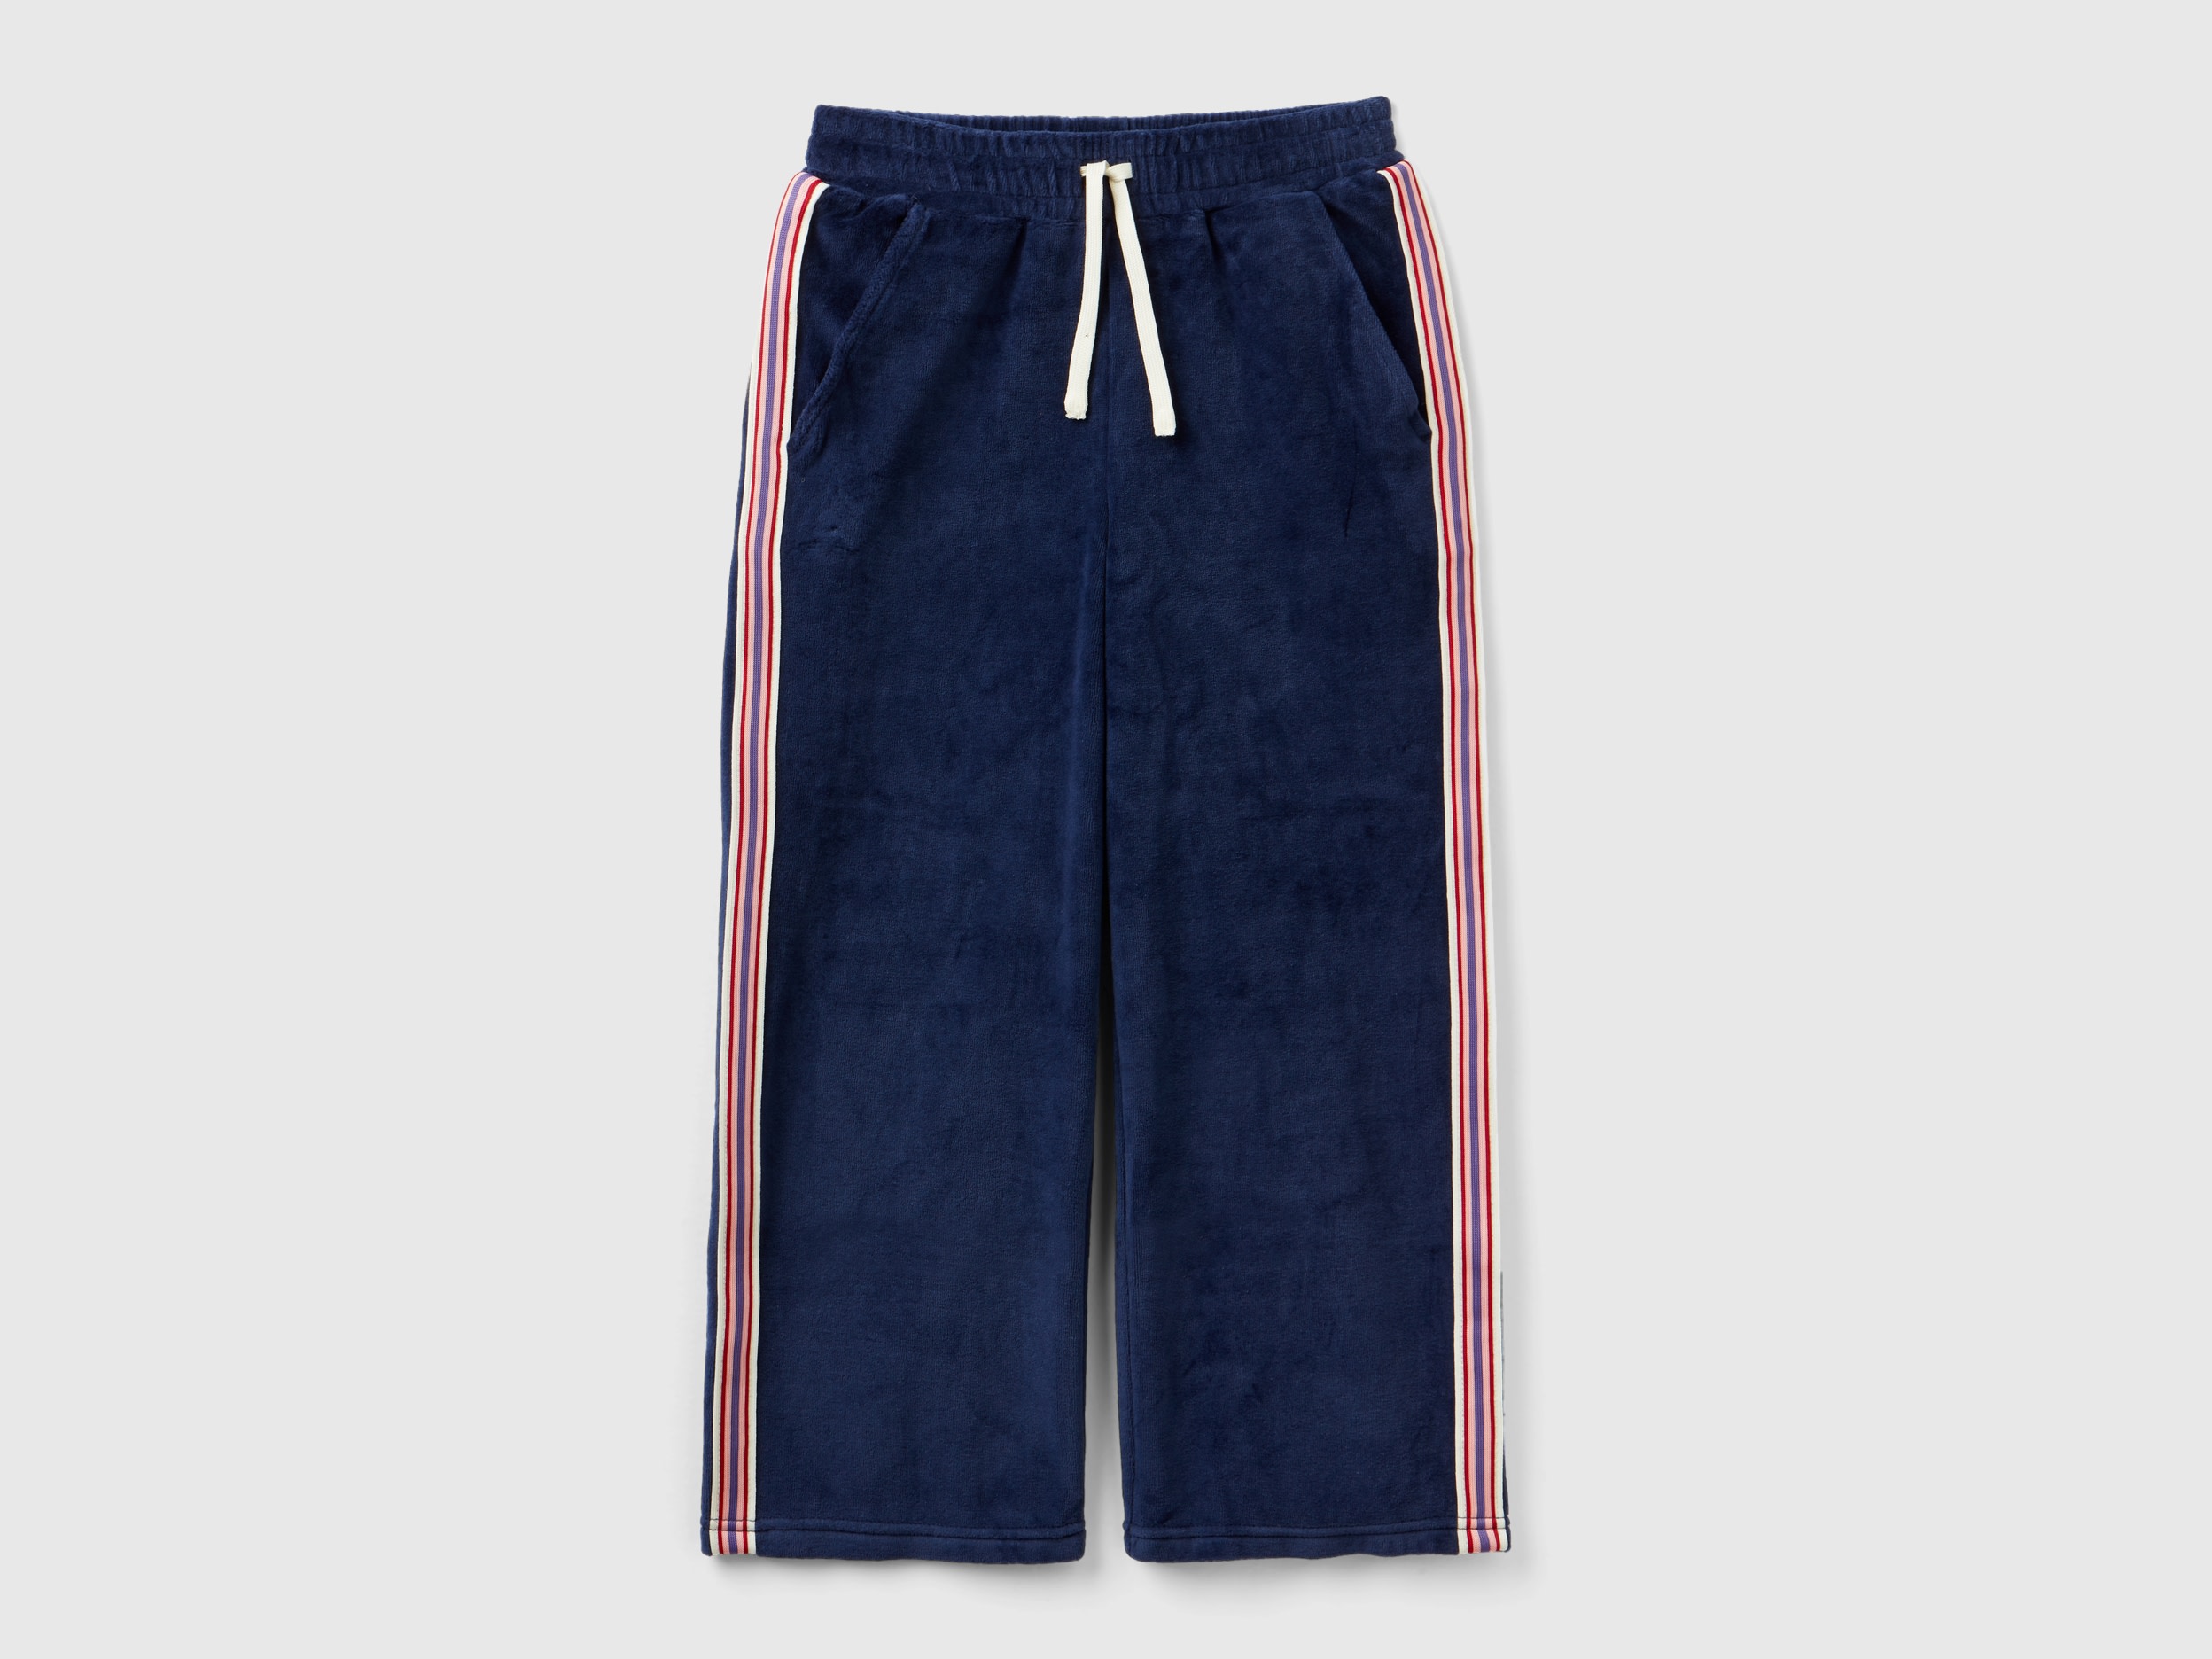 Benetton, Chenille Trousers With Striped Bands, size L, Dark Blue, Kids